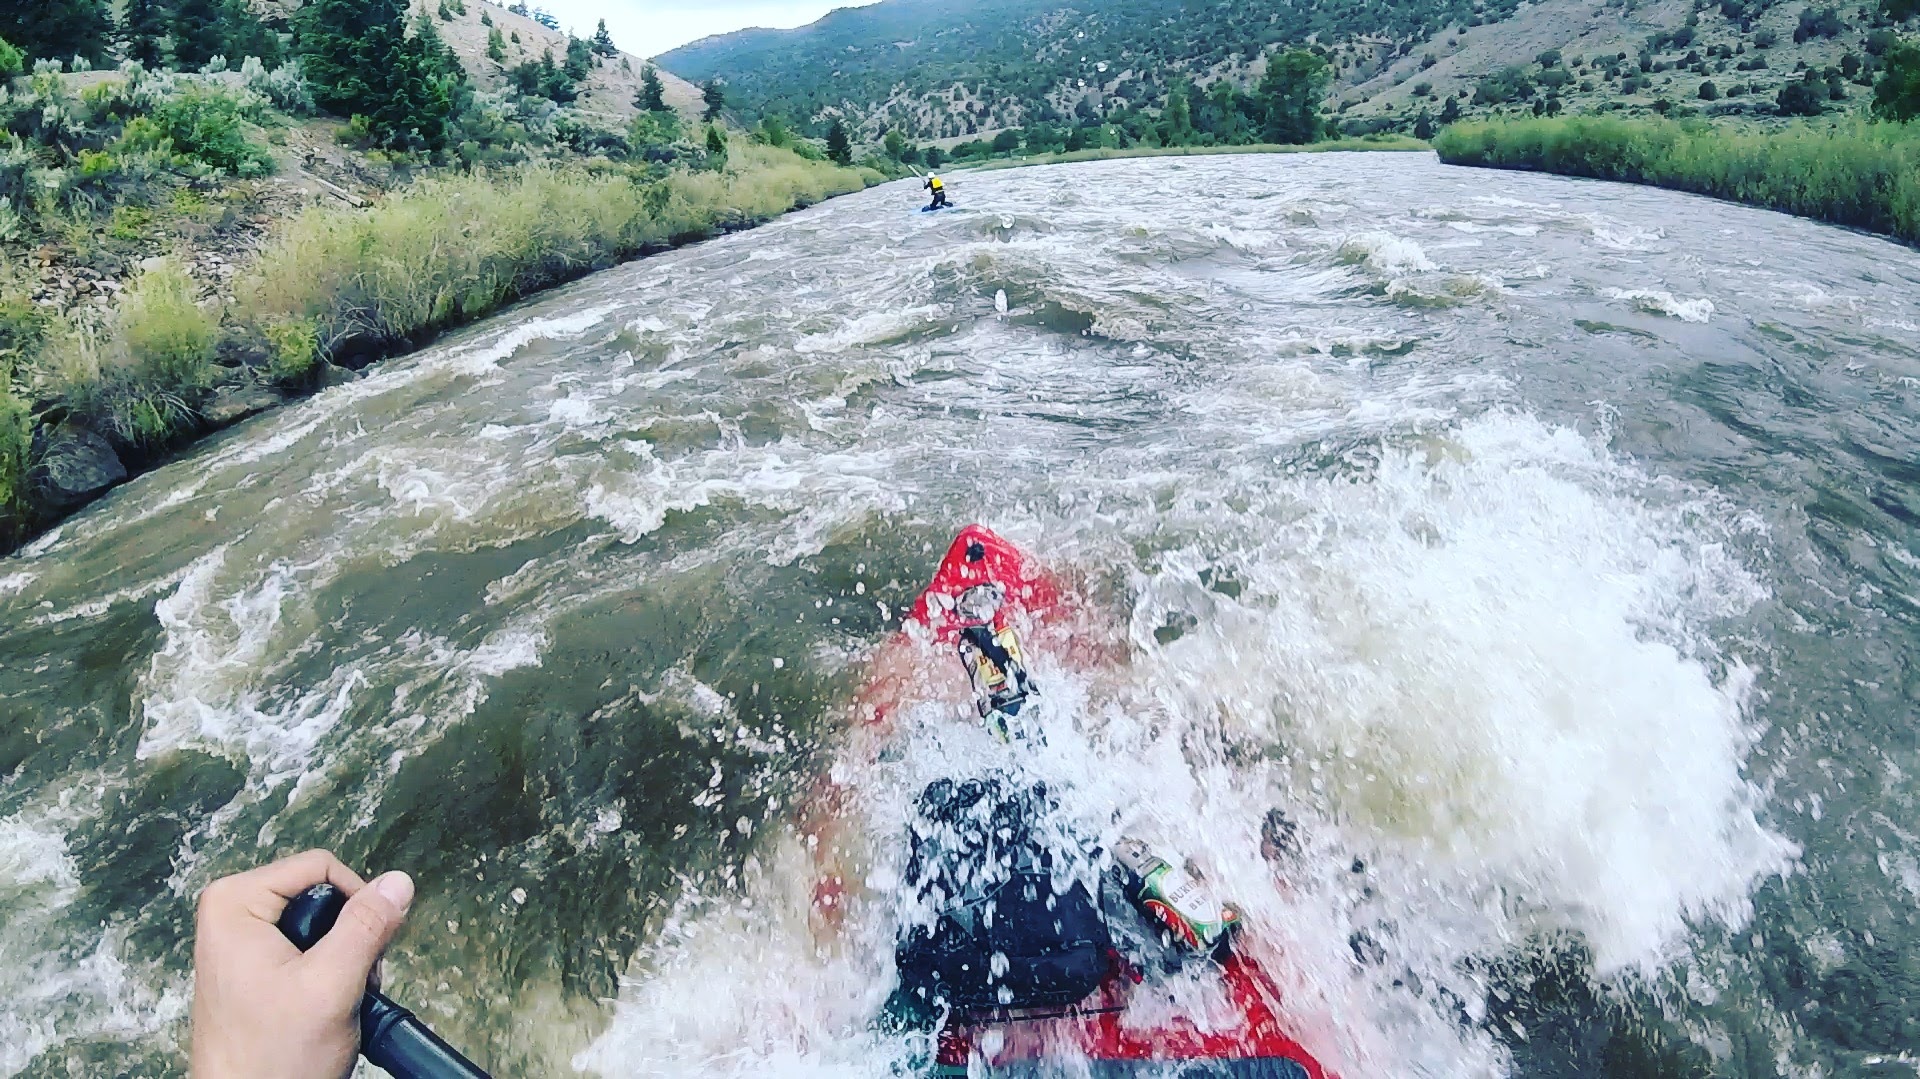 A stand up paddleboarder paddles over a river rapid.